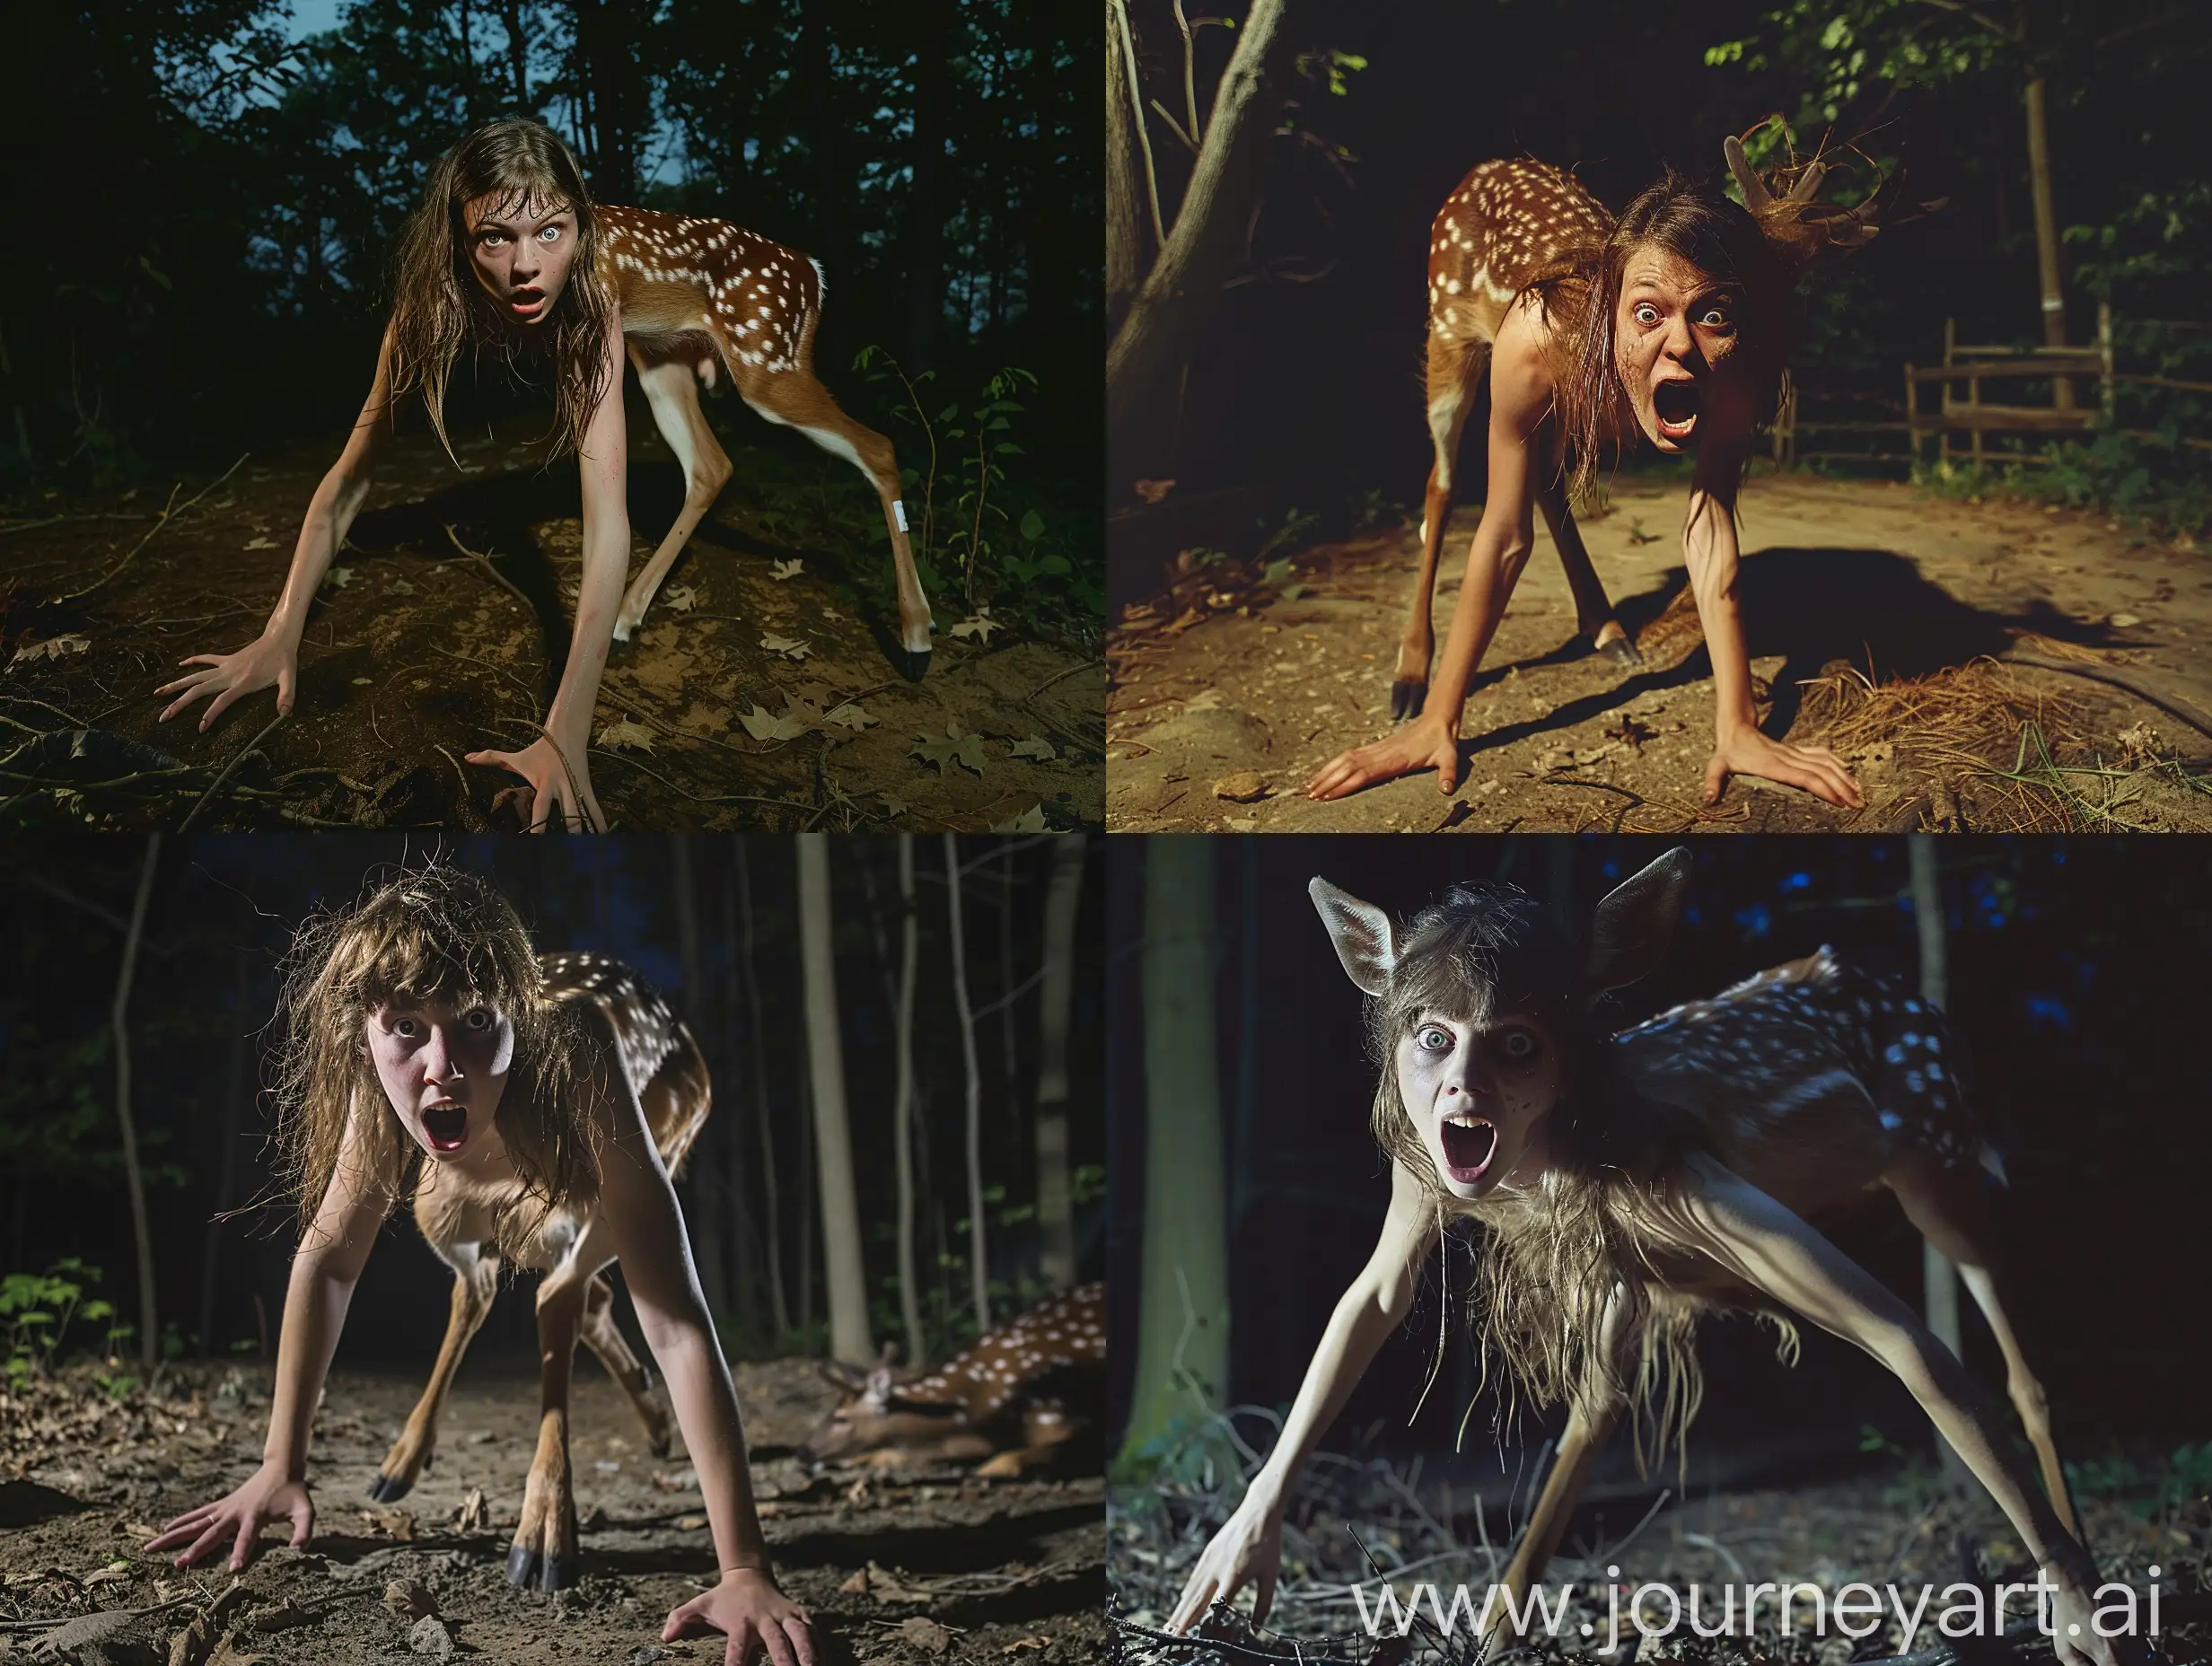 A young woman with loose brown hair, who has been transformed into a deer. The photo is taken while the transformation is almost completed. She is standing on all fours in a forest at night. She has a desperate expression, screaming for help. Realistic photograph, full body picture.